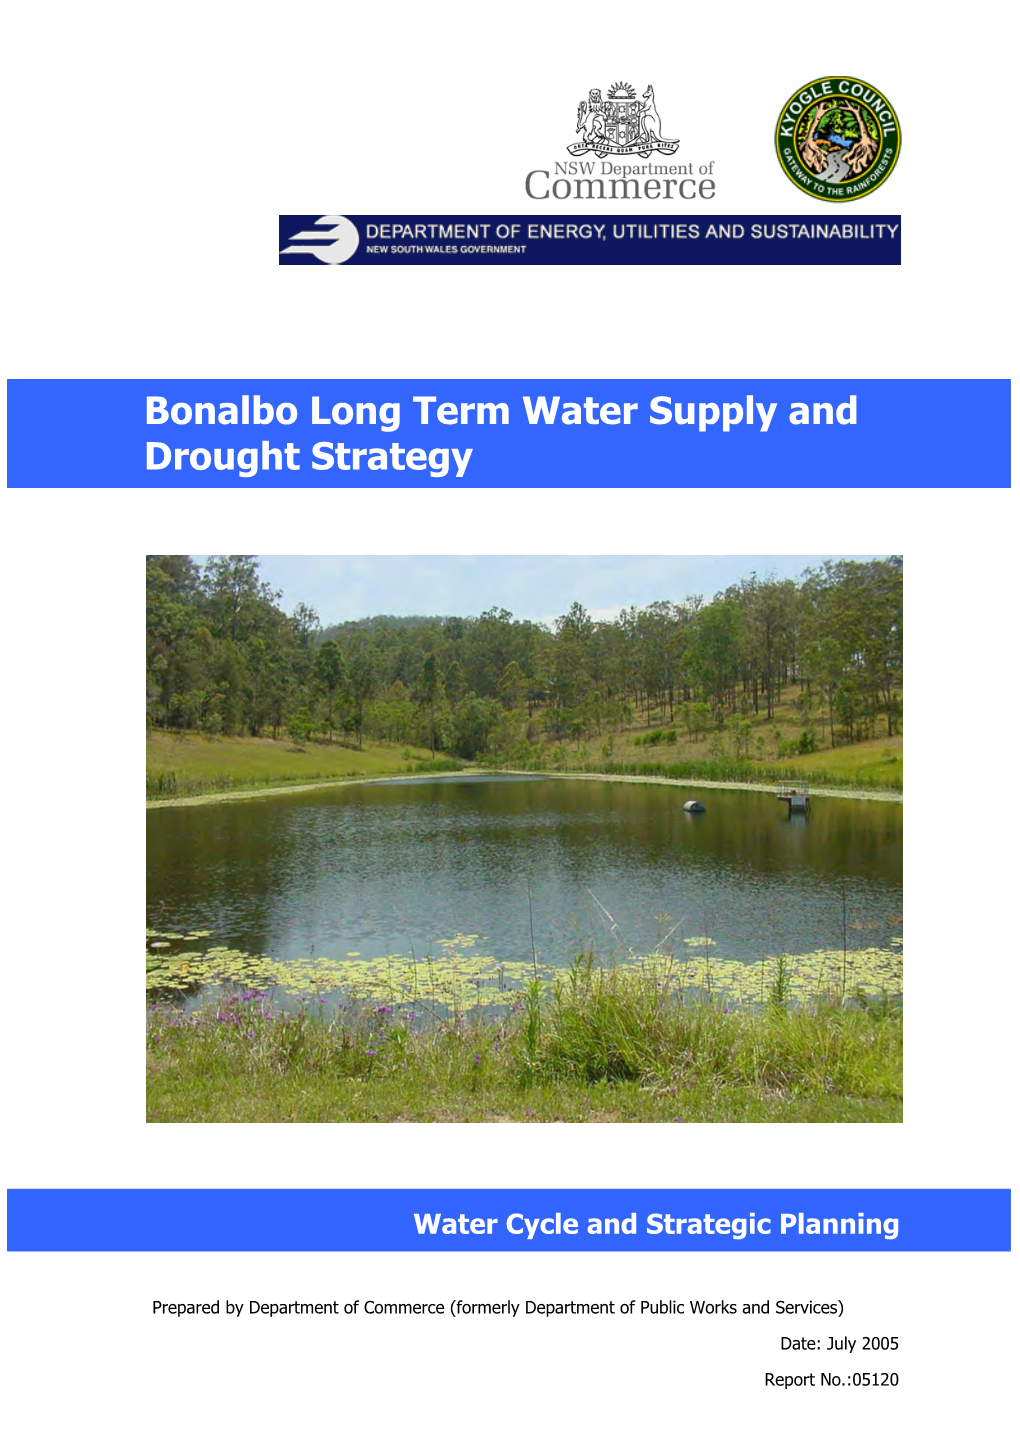 Bonalbo Long Term Water Supply and Drought Strategy